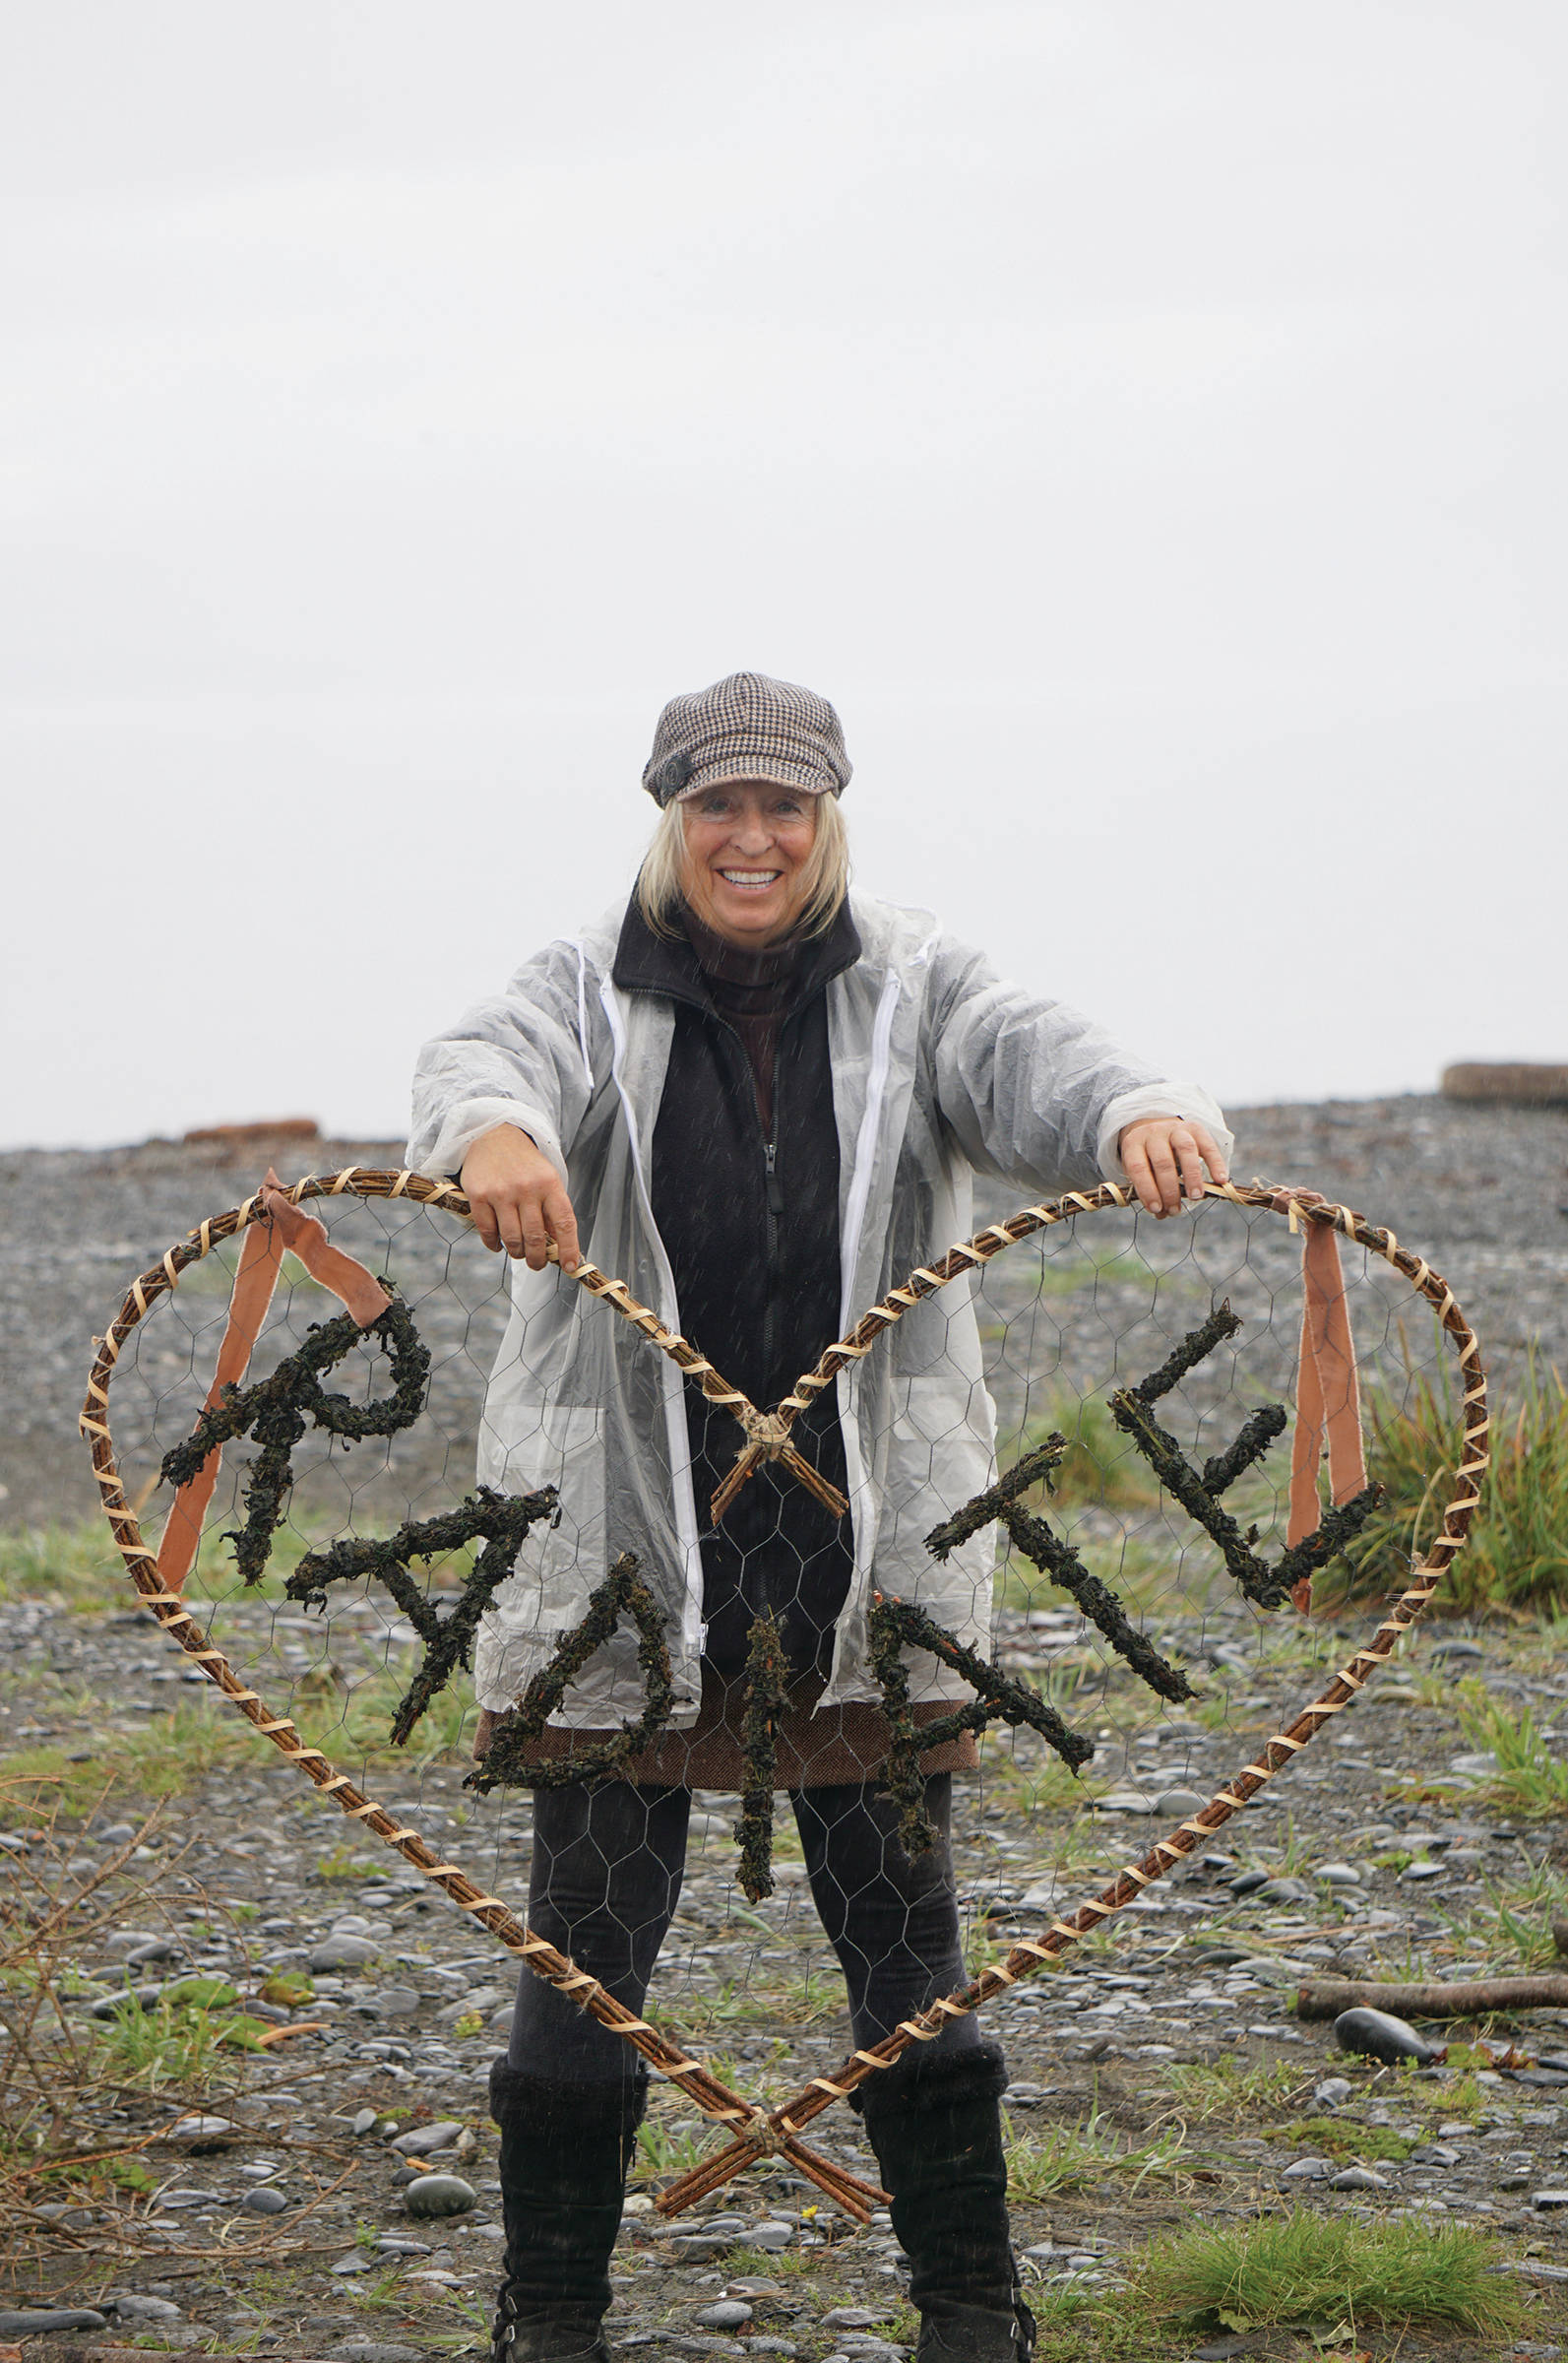 Burning Basket facilitator Mavis Muller holds up the name of the 16th annual Burning Basket, Radiate, on Monday, Sept. 9, 2019, at Mariner Park on the Homer Spit in Homer, Alaska. (Photo by Michael Armstrong/Homer News)